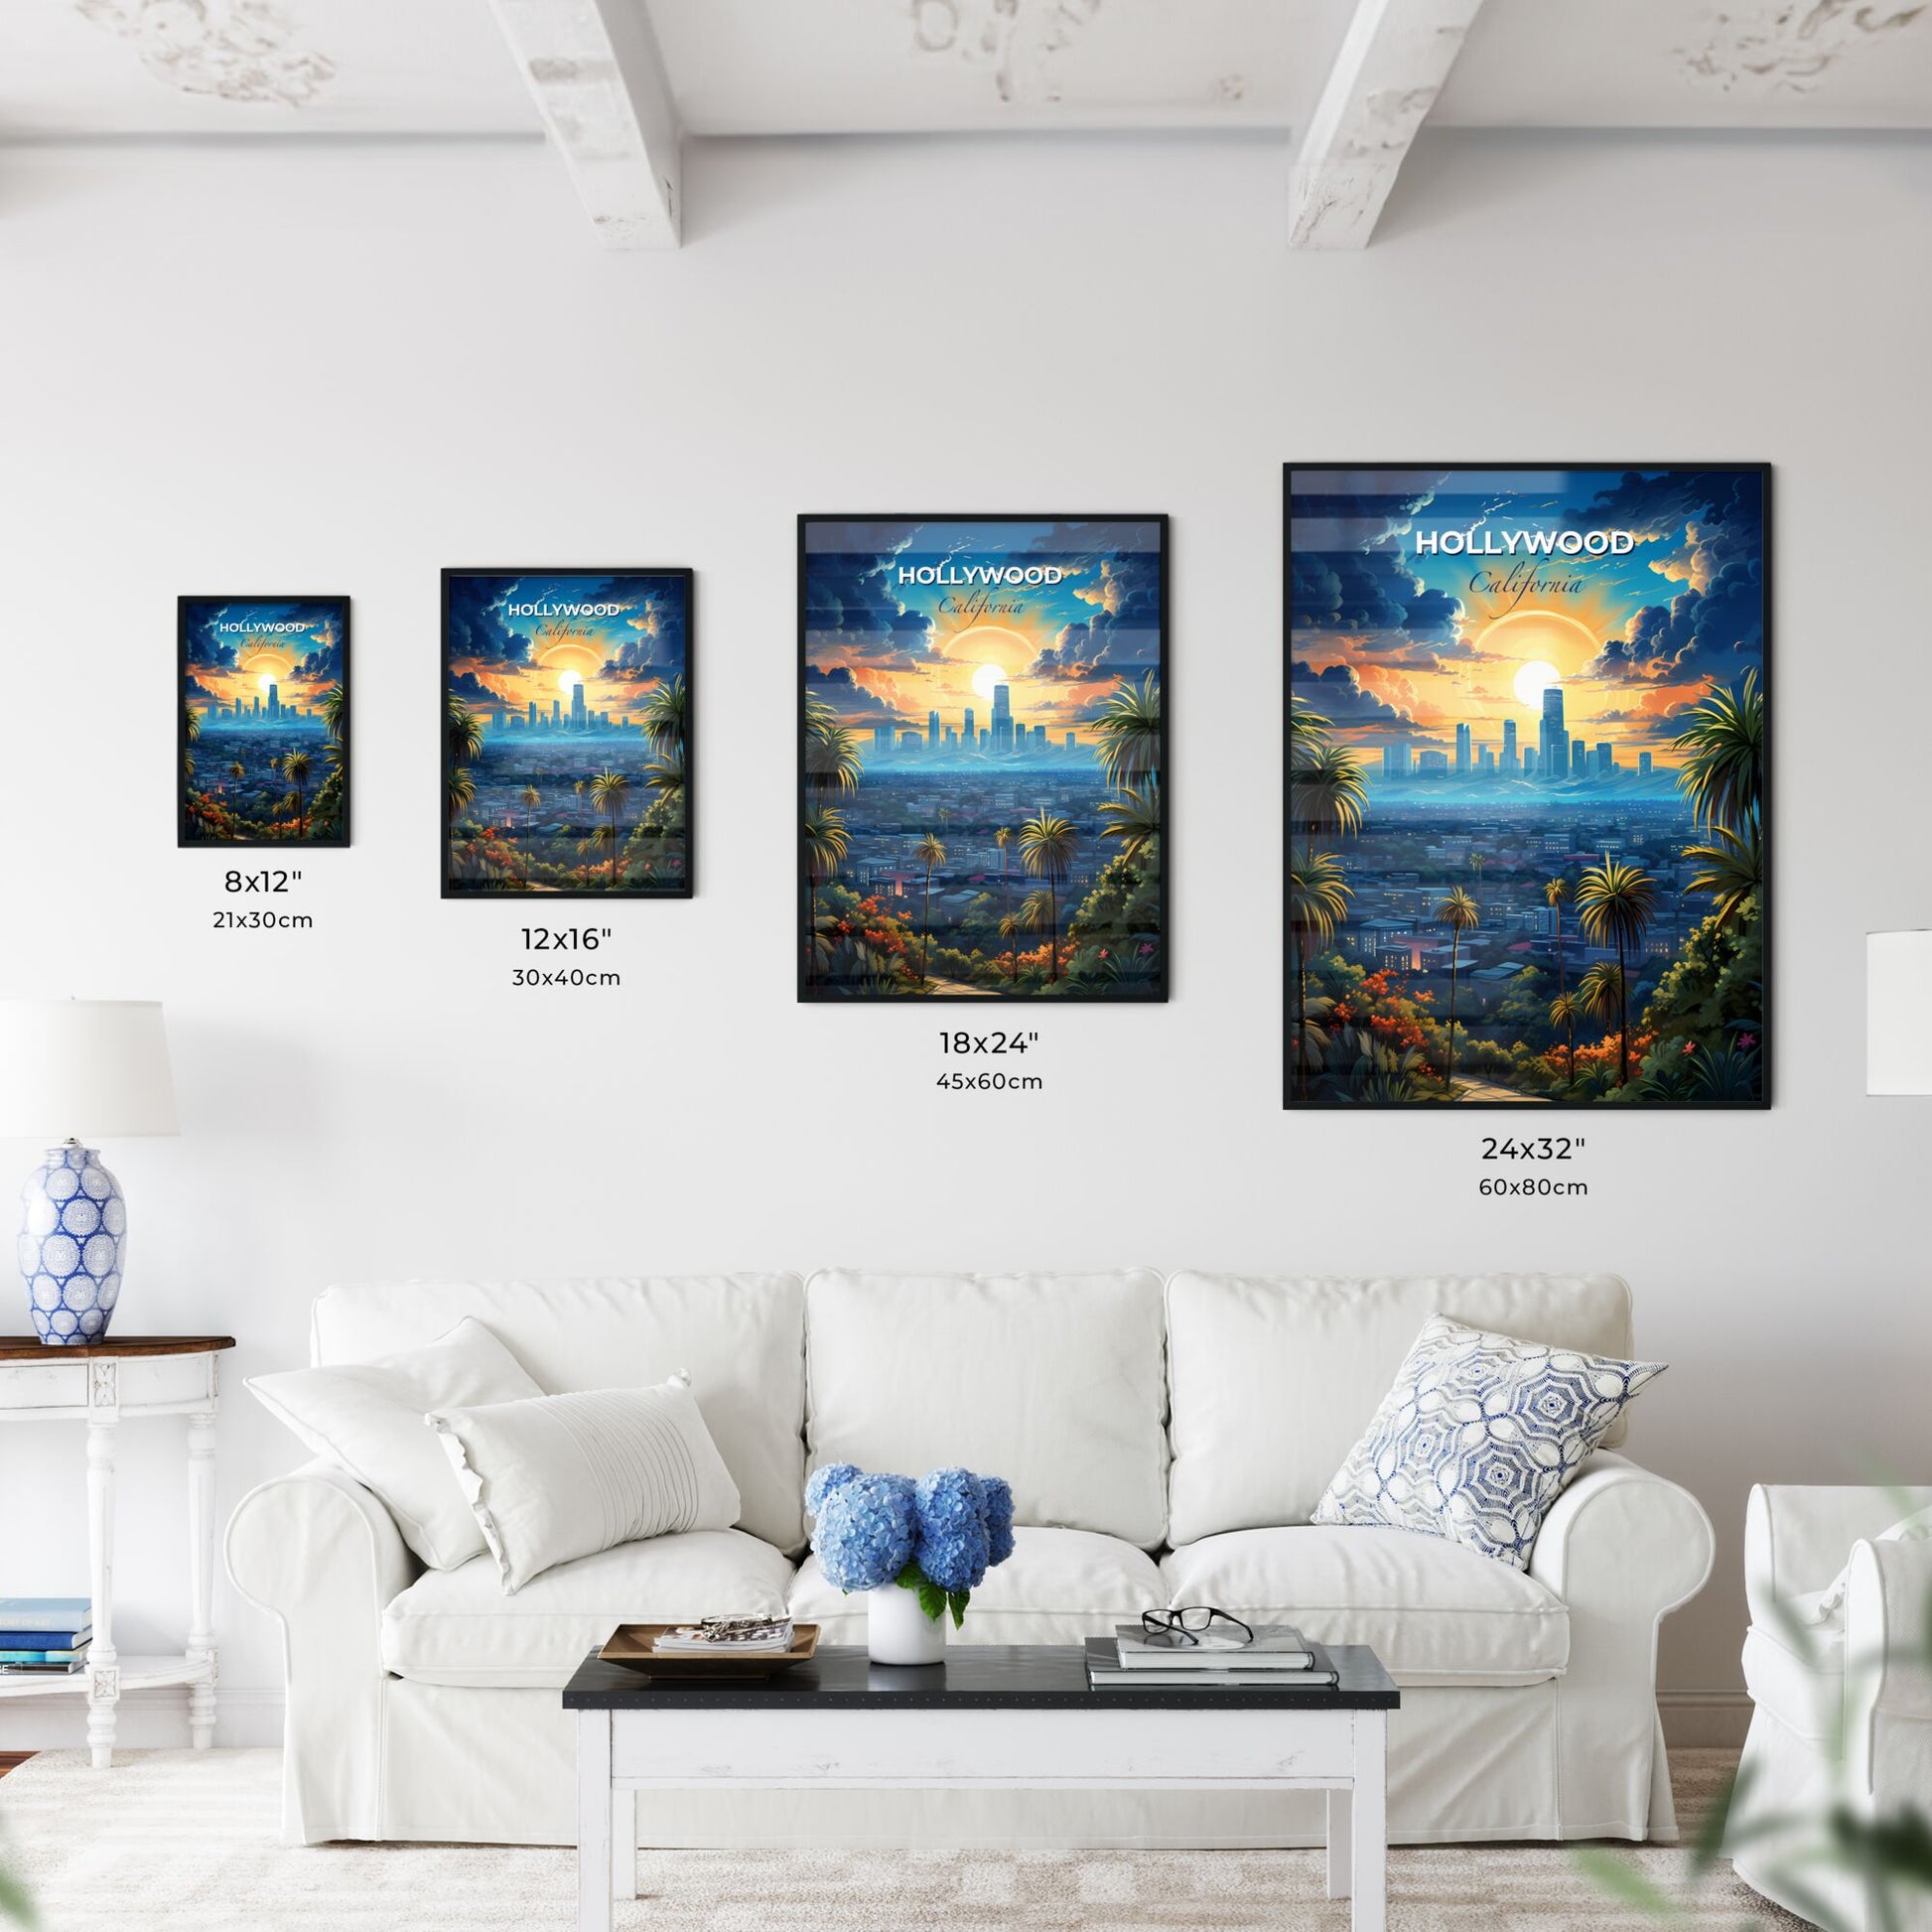 Hollywood CA Skyline - A City With Palm Trees And Buildings - Customizable Travel Gift Default Title